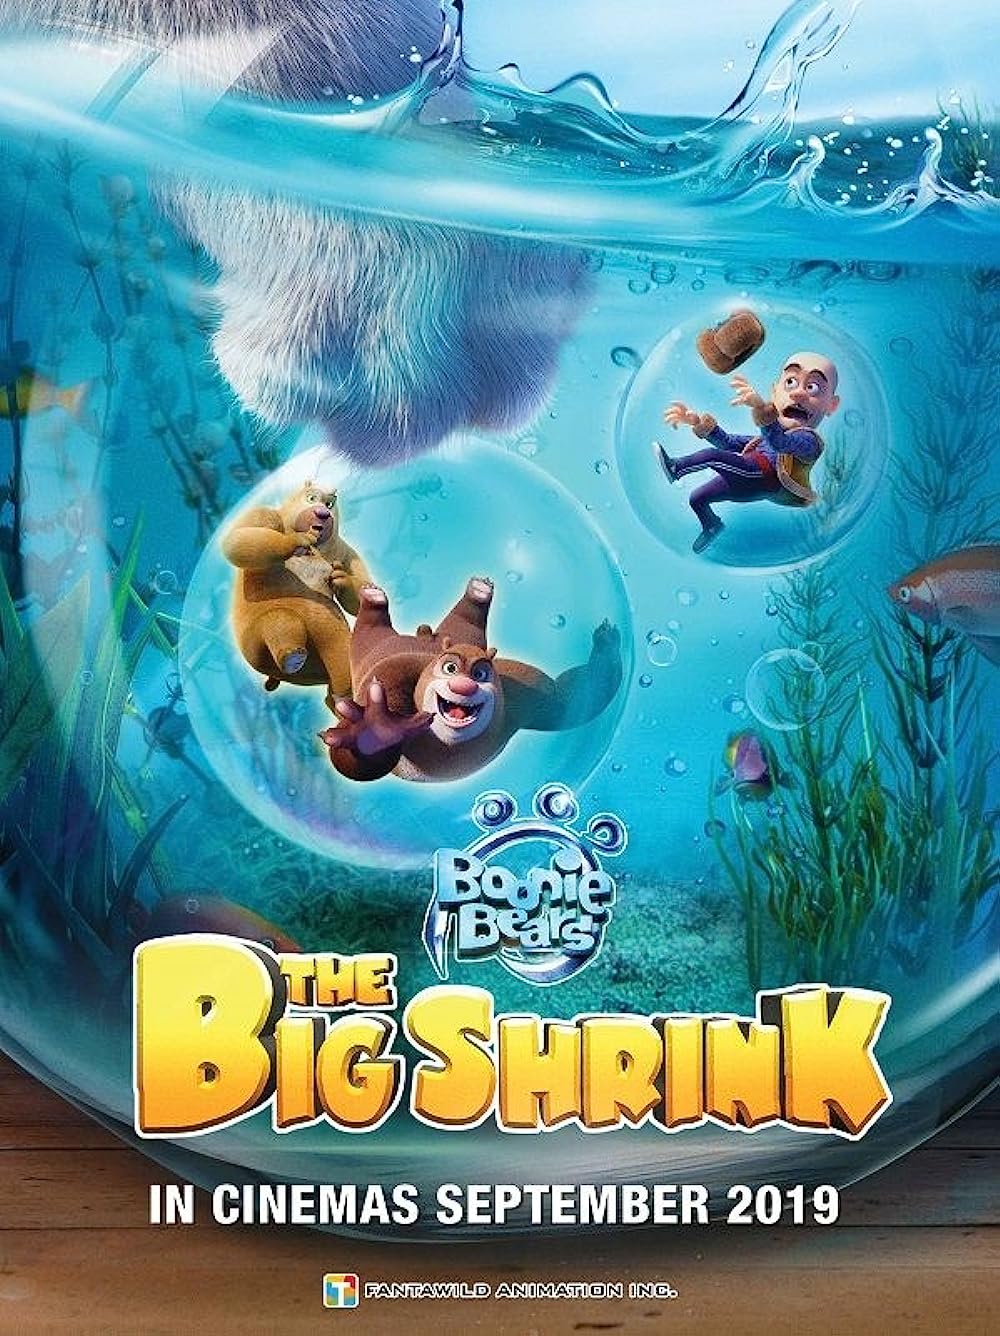 Boonie Bears: The Big Shrink 2018 Tamil Dubbed Animation Movie Online